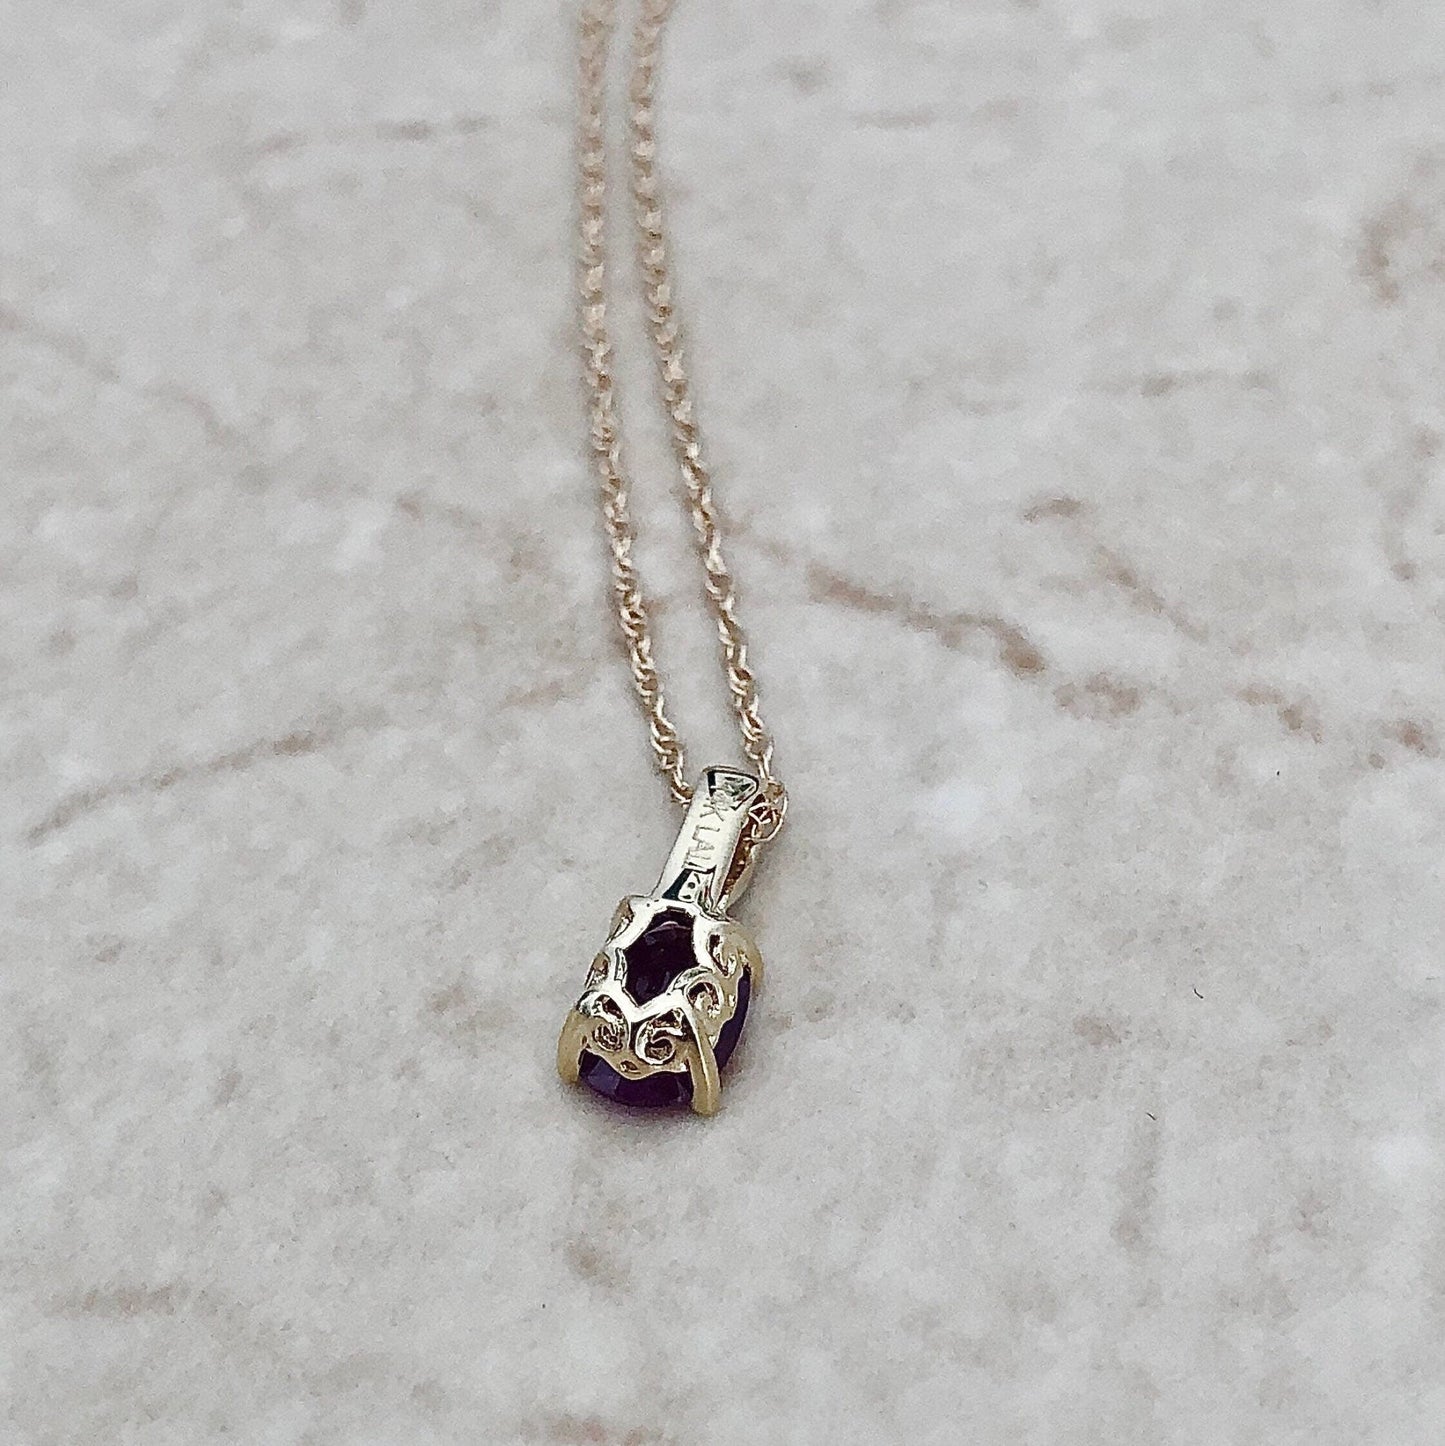 14K Ruby & Diamond Pendant Necklace - Yellow Gold Ruby Pendant - July Birthstone - Ruby Solitaire Pendant - Best Gift For Her